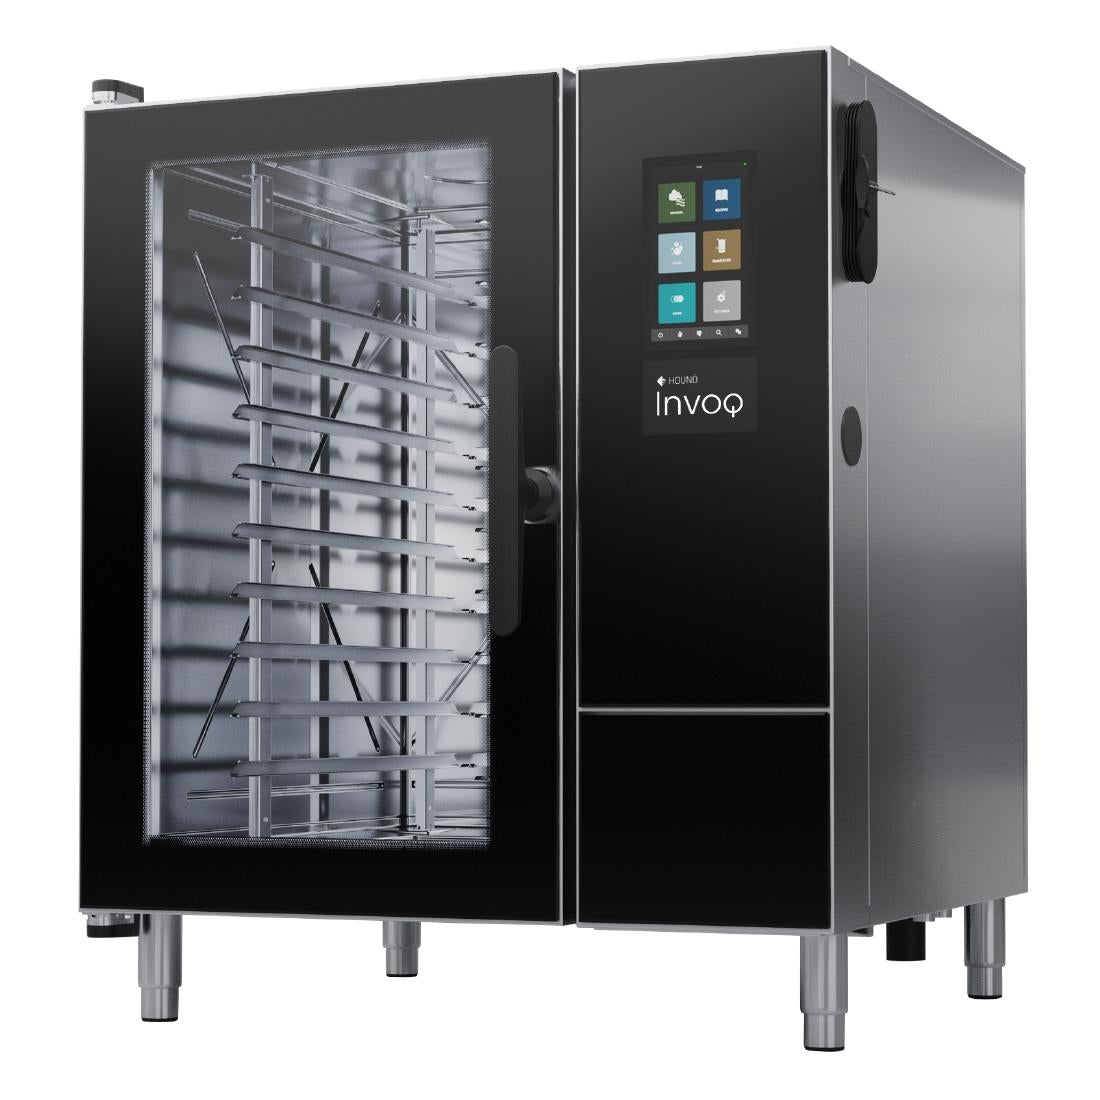 CX488 Houno Invoq Combi Oven Electric 10 Grid 1/1 GN JD Catering Equipment Solutions Ltd